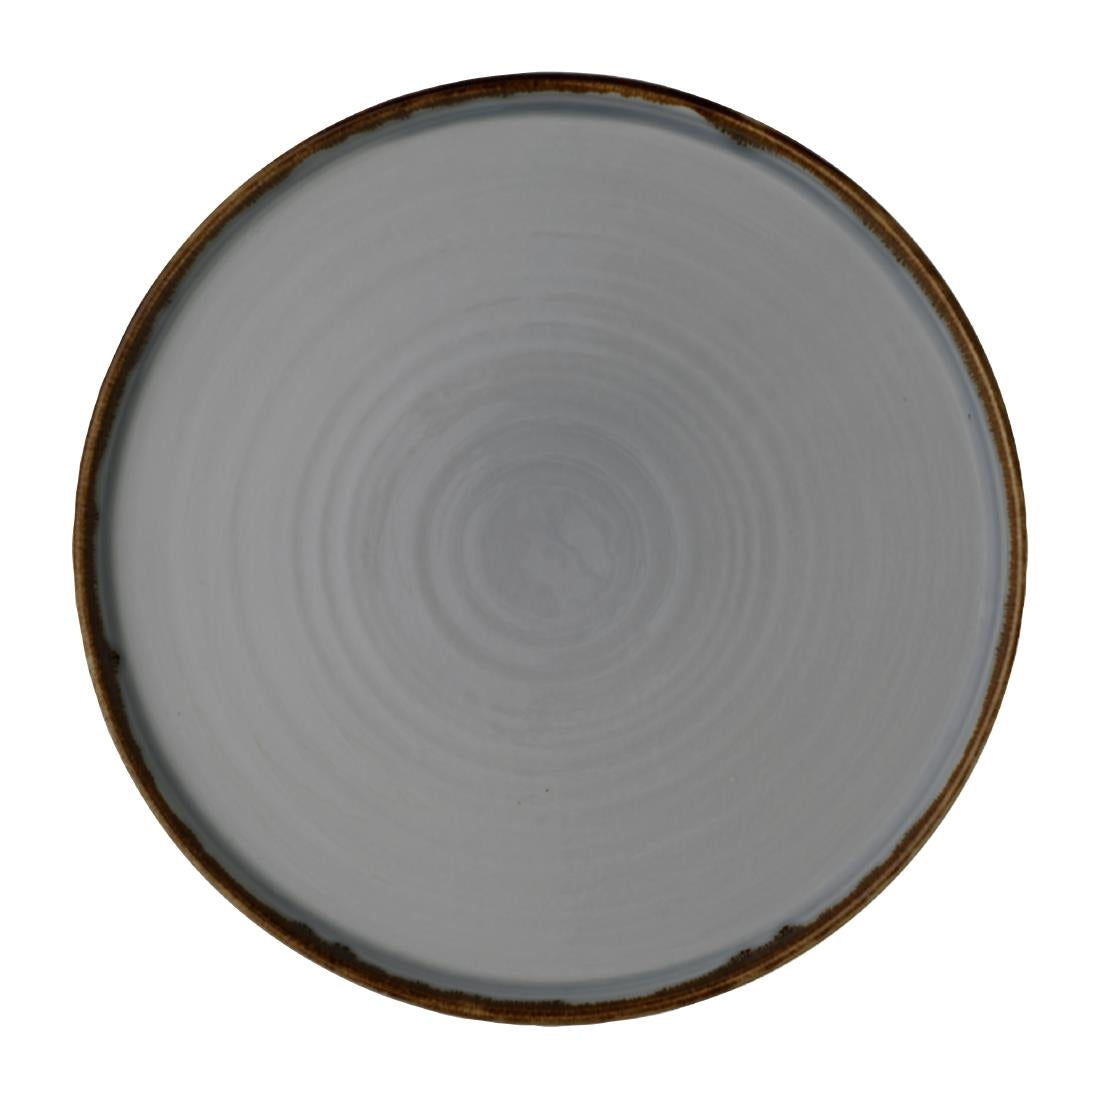 FX151 Dudson Harvest Walled Plates Grey 260mm (Pack of 6) JD Catering Equipment Solutions Ltd